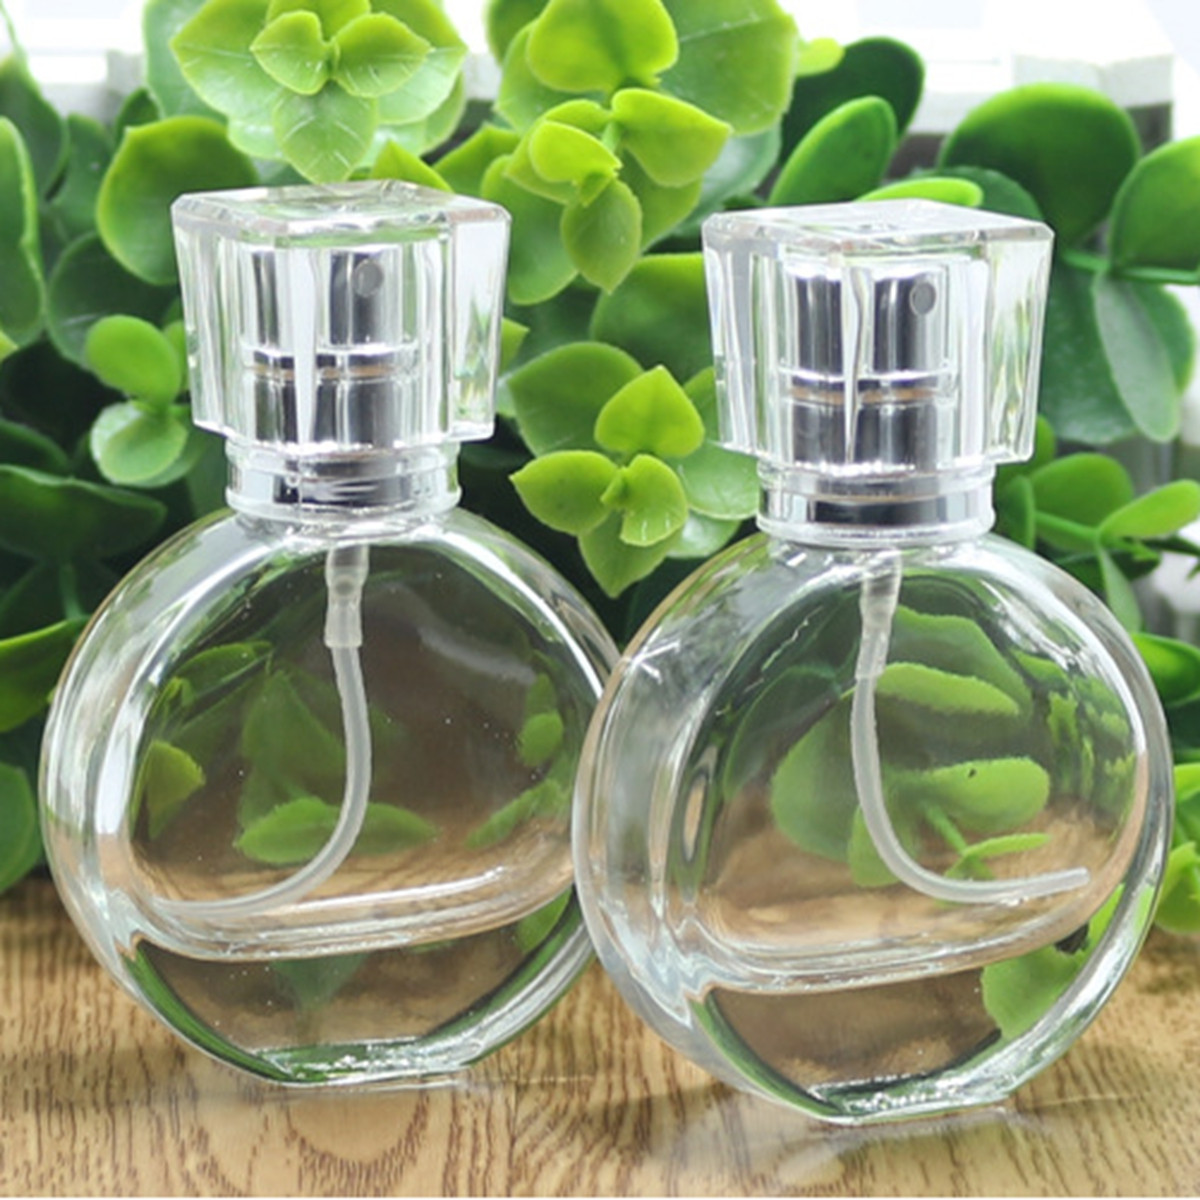 

1pc Empty Refillable Perfume Spray Bottle Glass Fragrance Aroma Atomizer Container Travel